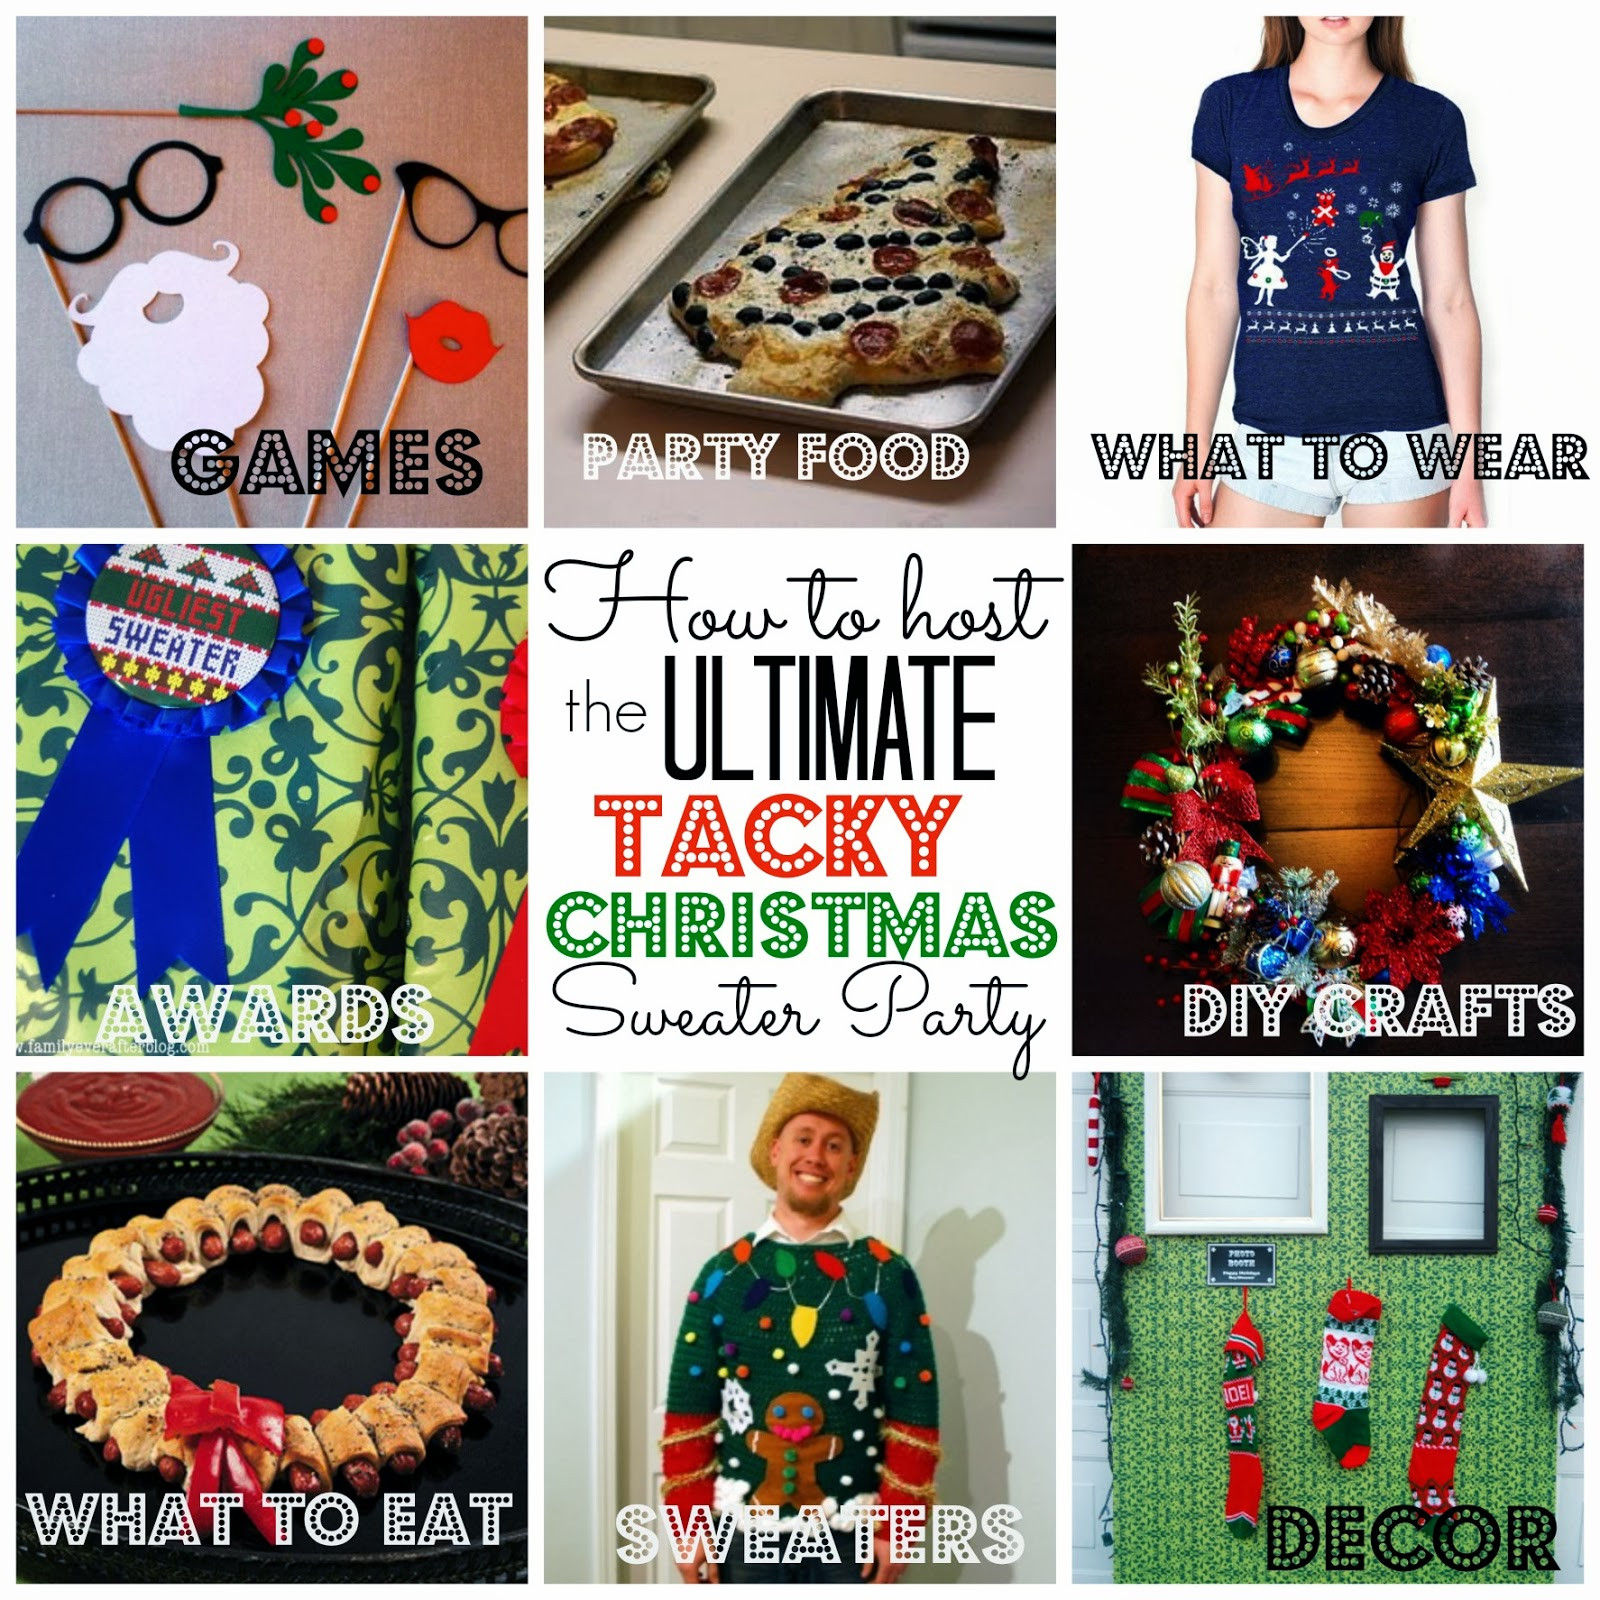 Christmas Sweater Party Ideas
 Crafty Texas Girls Party Planning Tacky Christmas Sweater